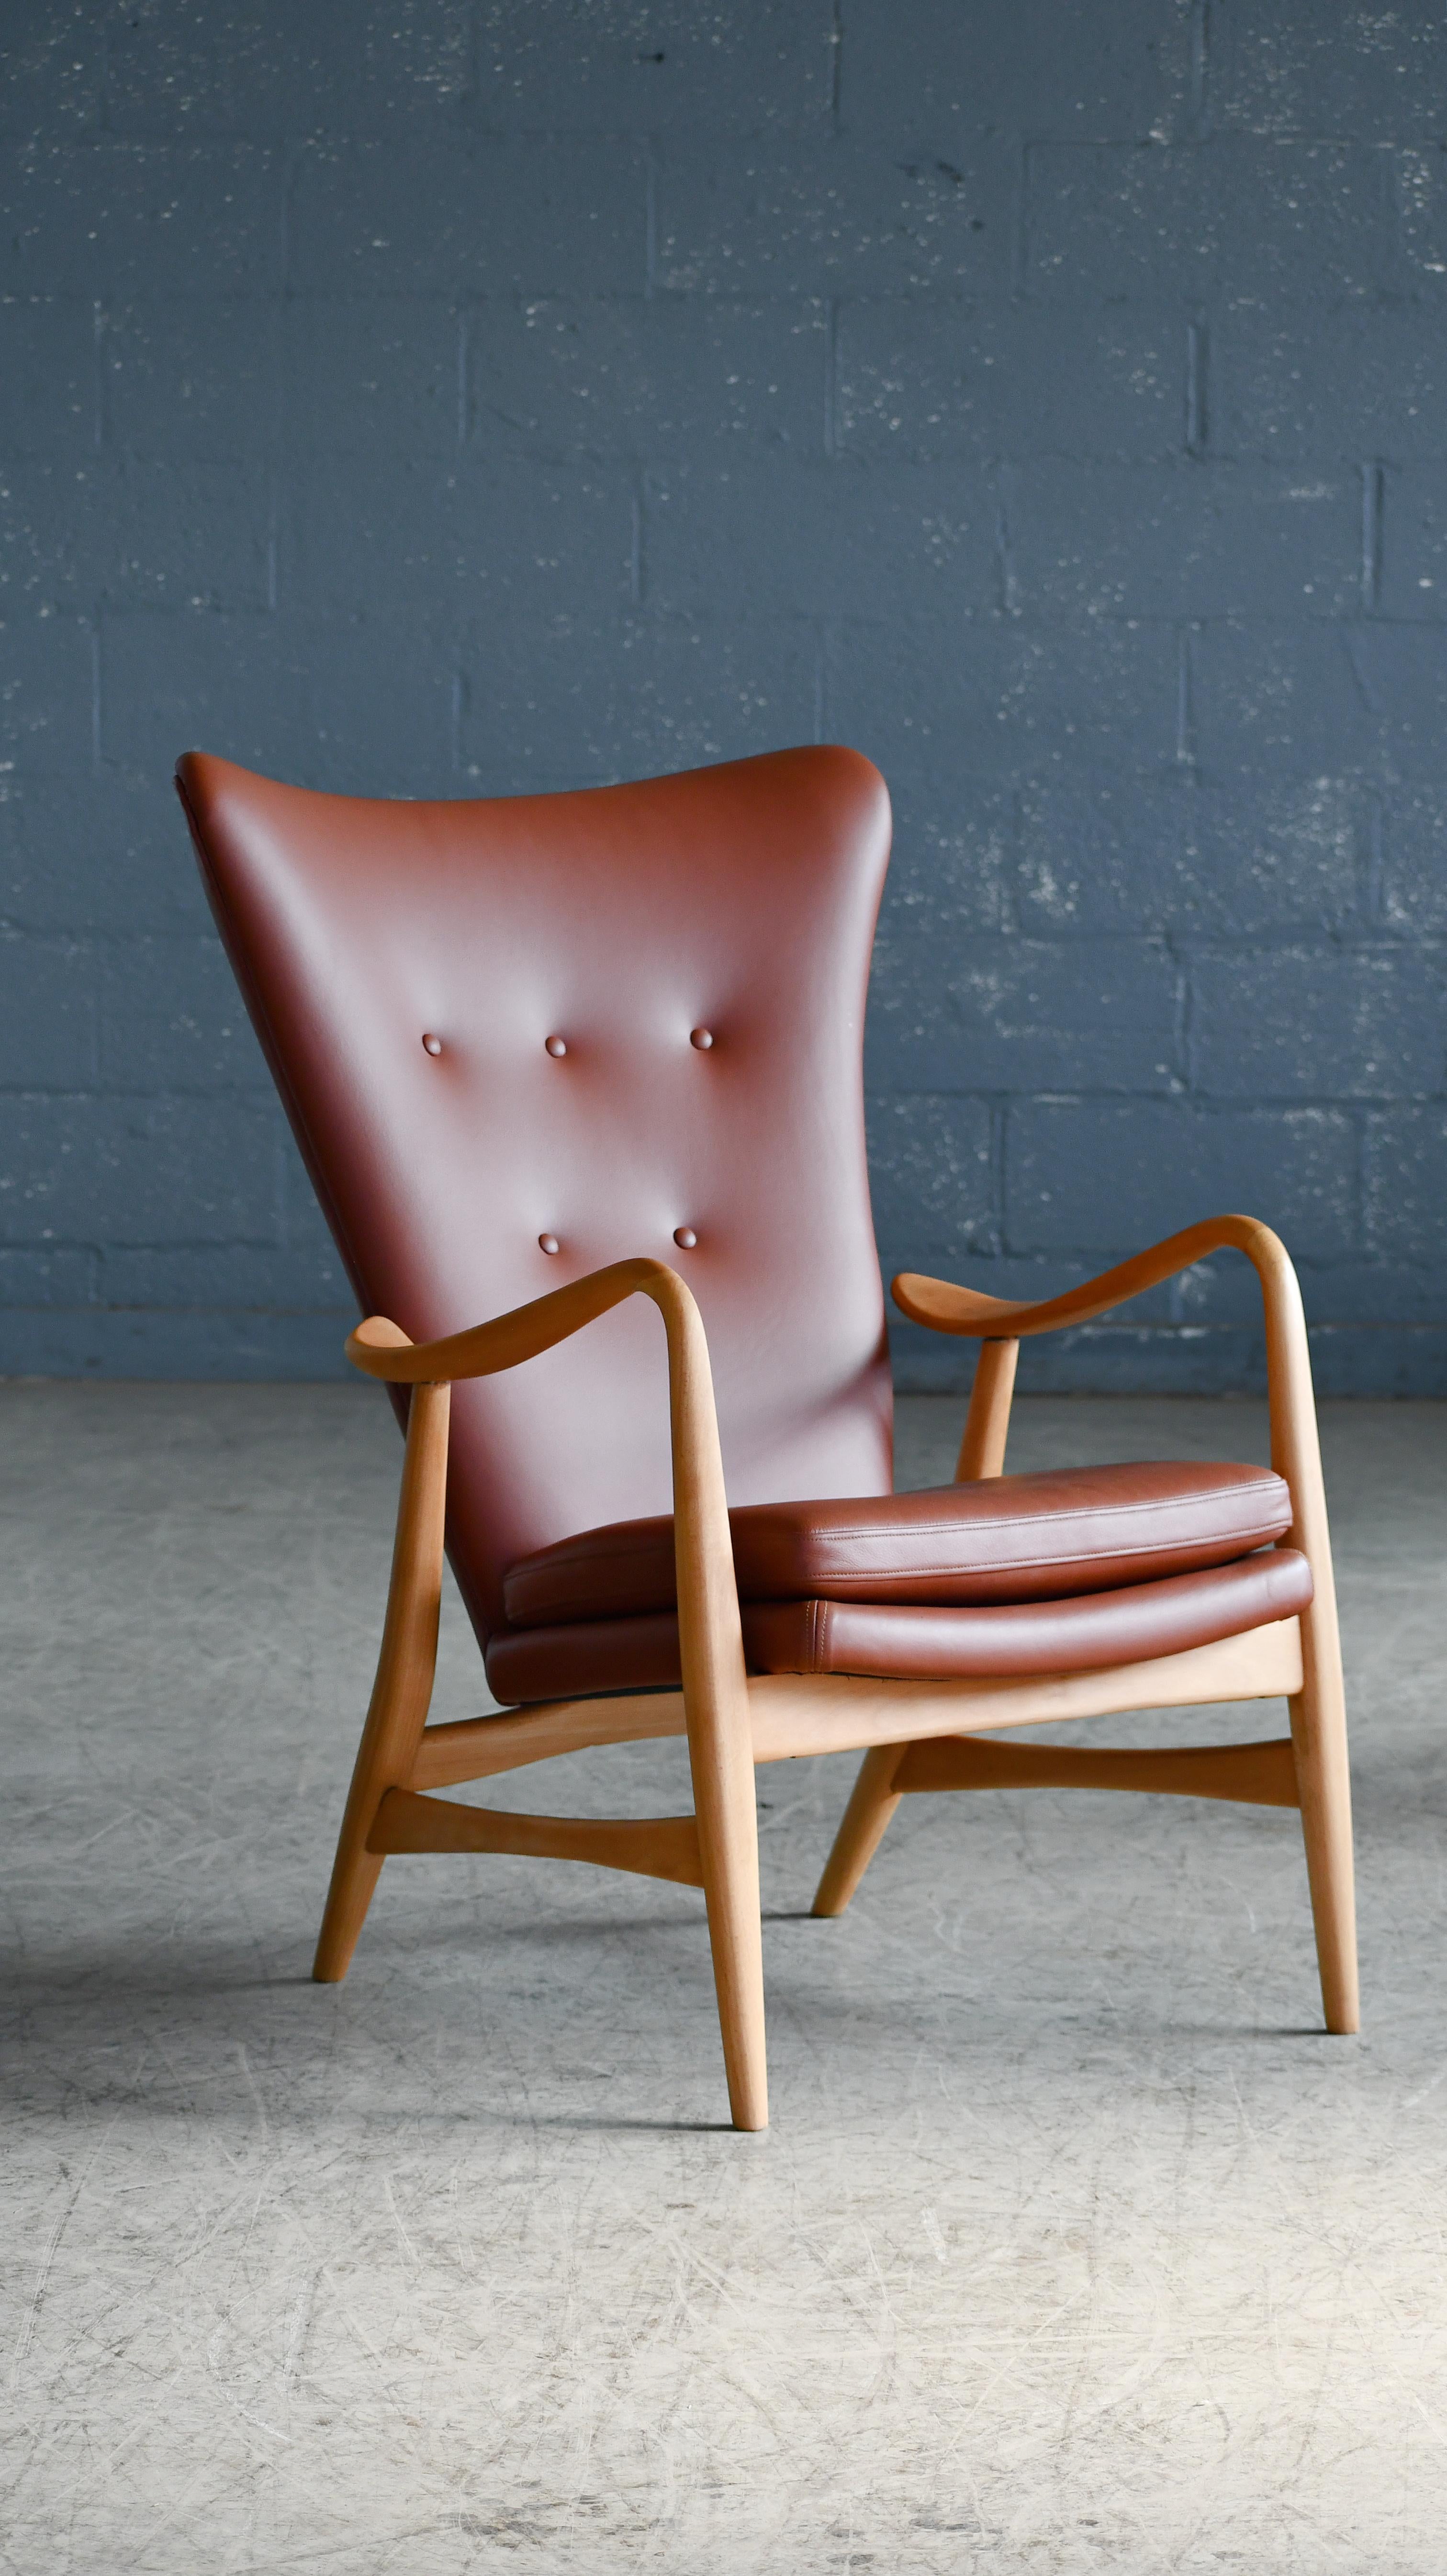 Easy chair with beech frame made by J. Carlsens Møbelfabrik in Denmark in the 1950's. Often compared to famed designs from Madsen and Schubell as very similar high quality craftmanship and lines. Seat and button-fitted back newly upholstered with